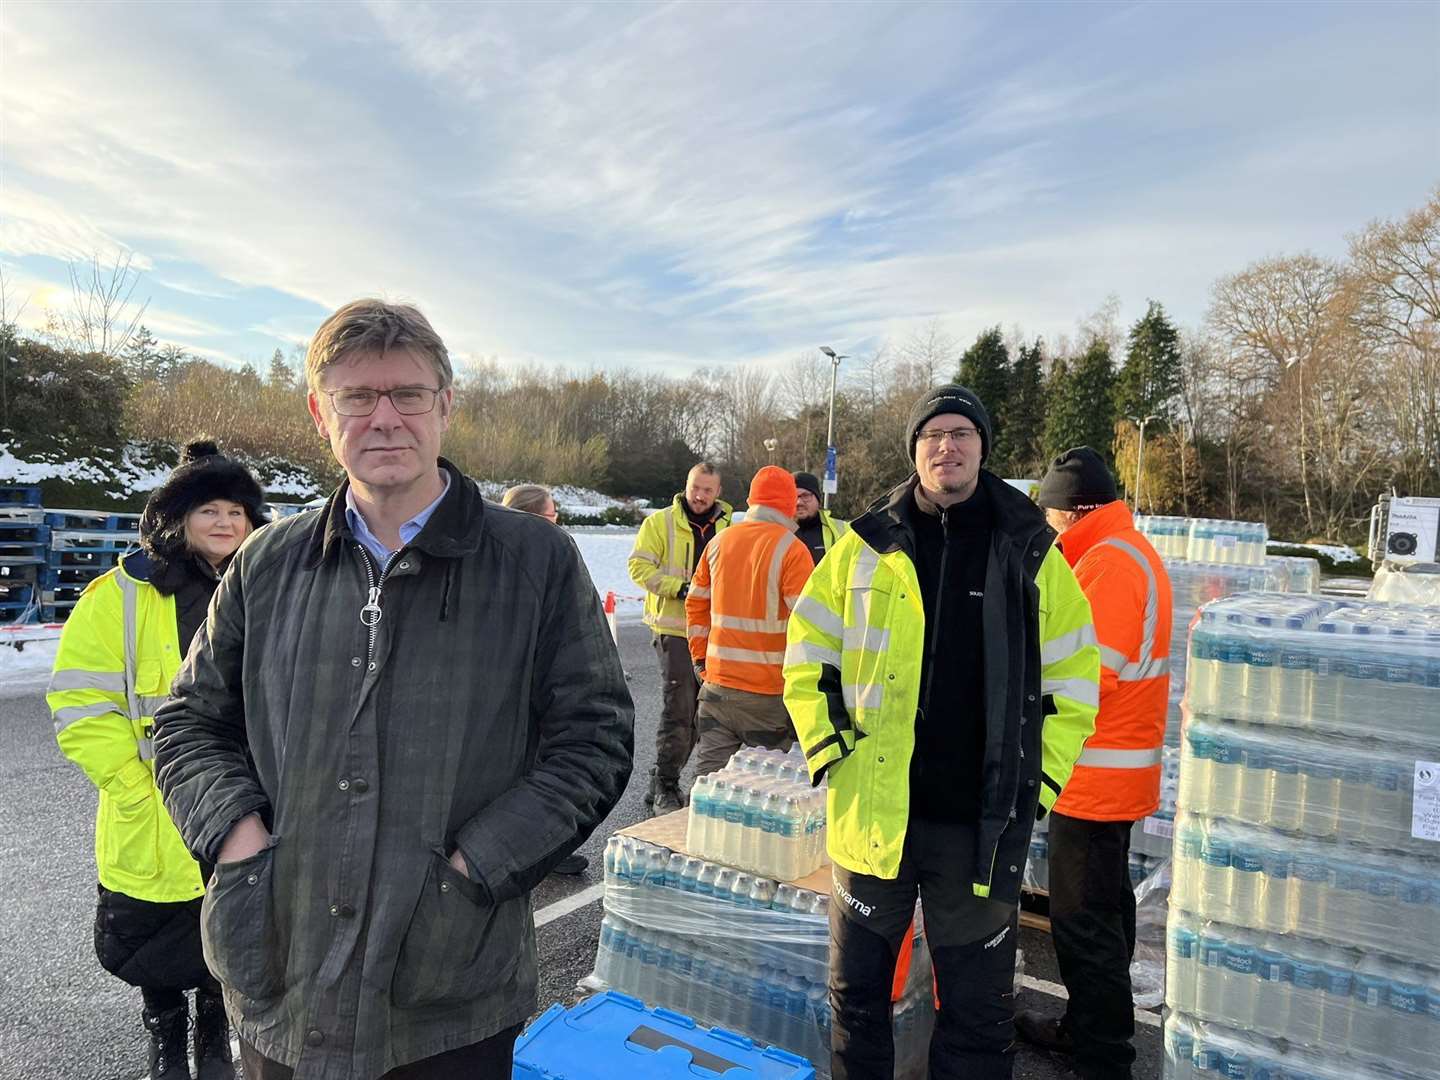 Tunbridge Wells MP Greg Clark visited the town as it's faced with water problems. Picture: Greg Clark